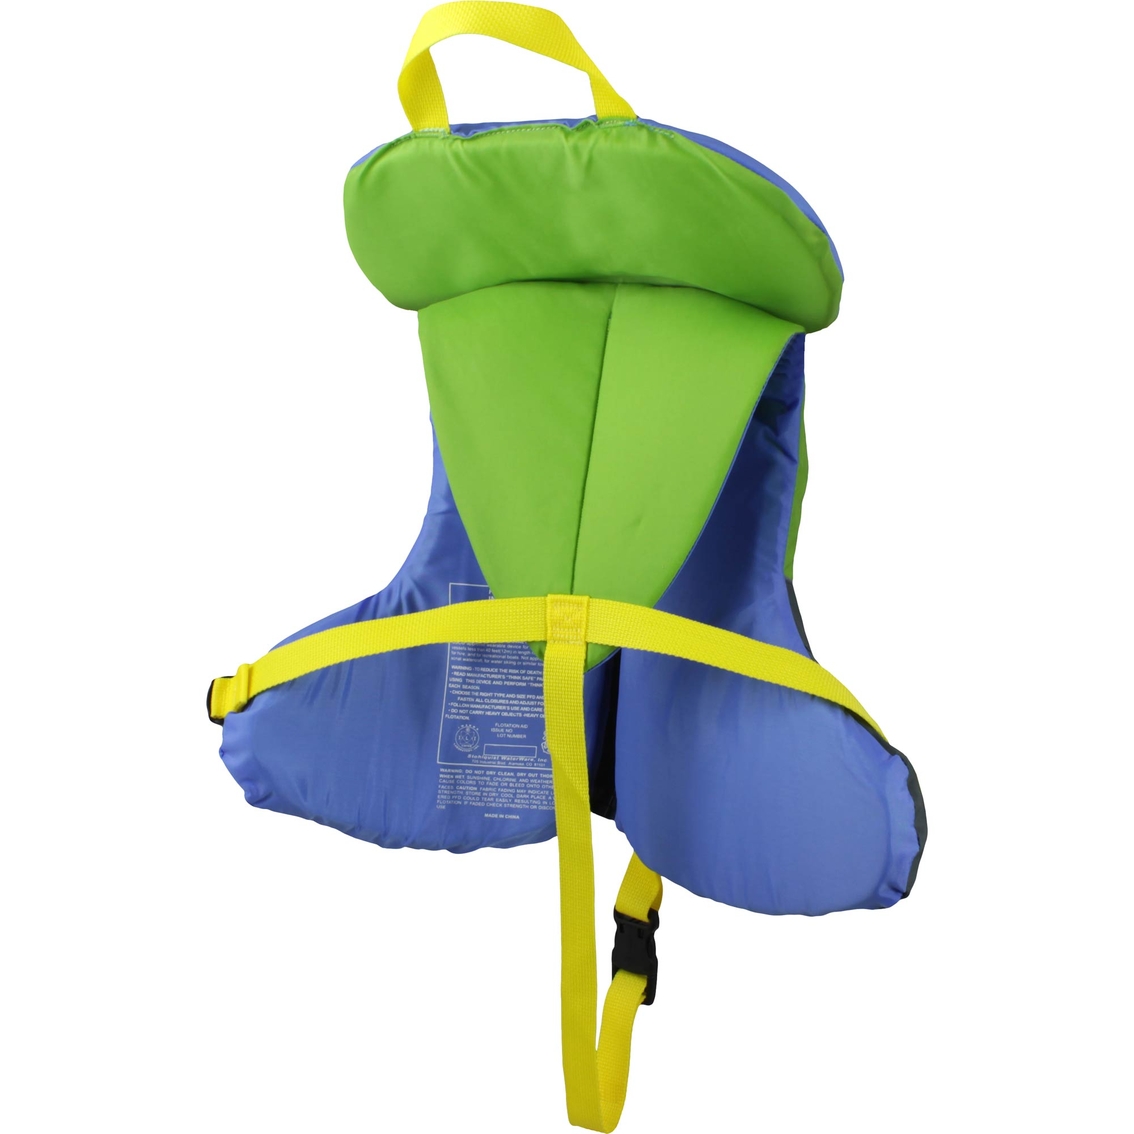 US Divers Child Personal Floatation Device (Lifejacket) - Image 2 of 3